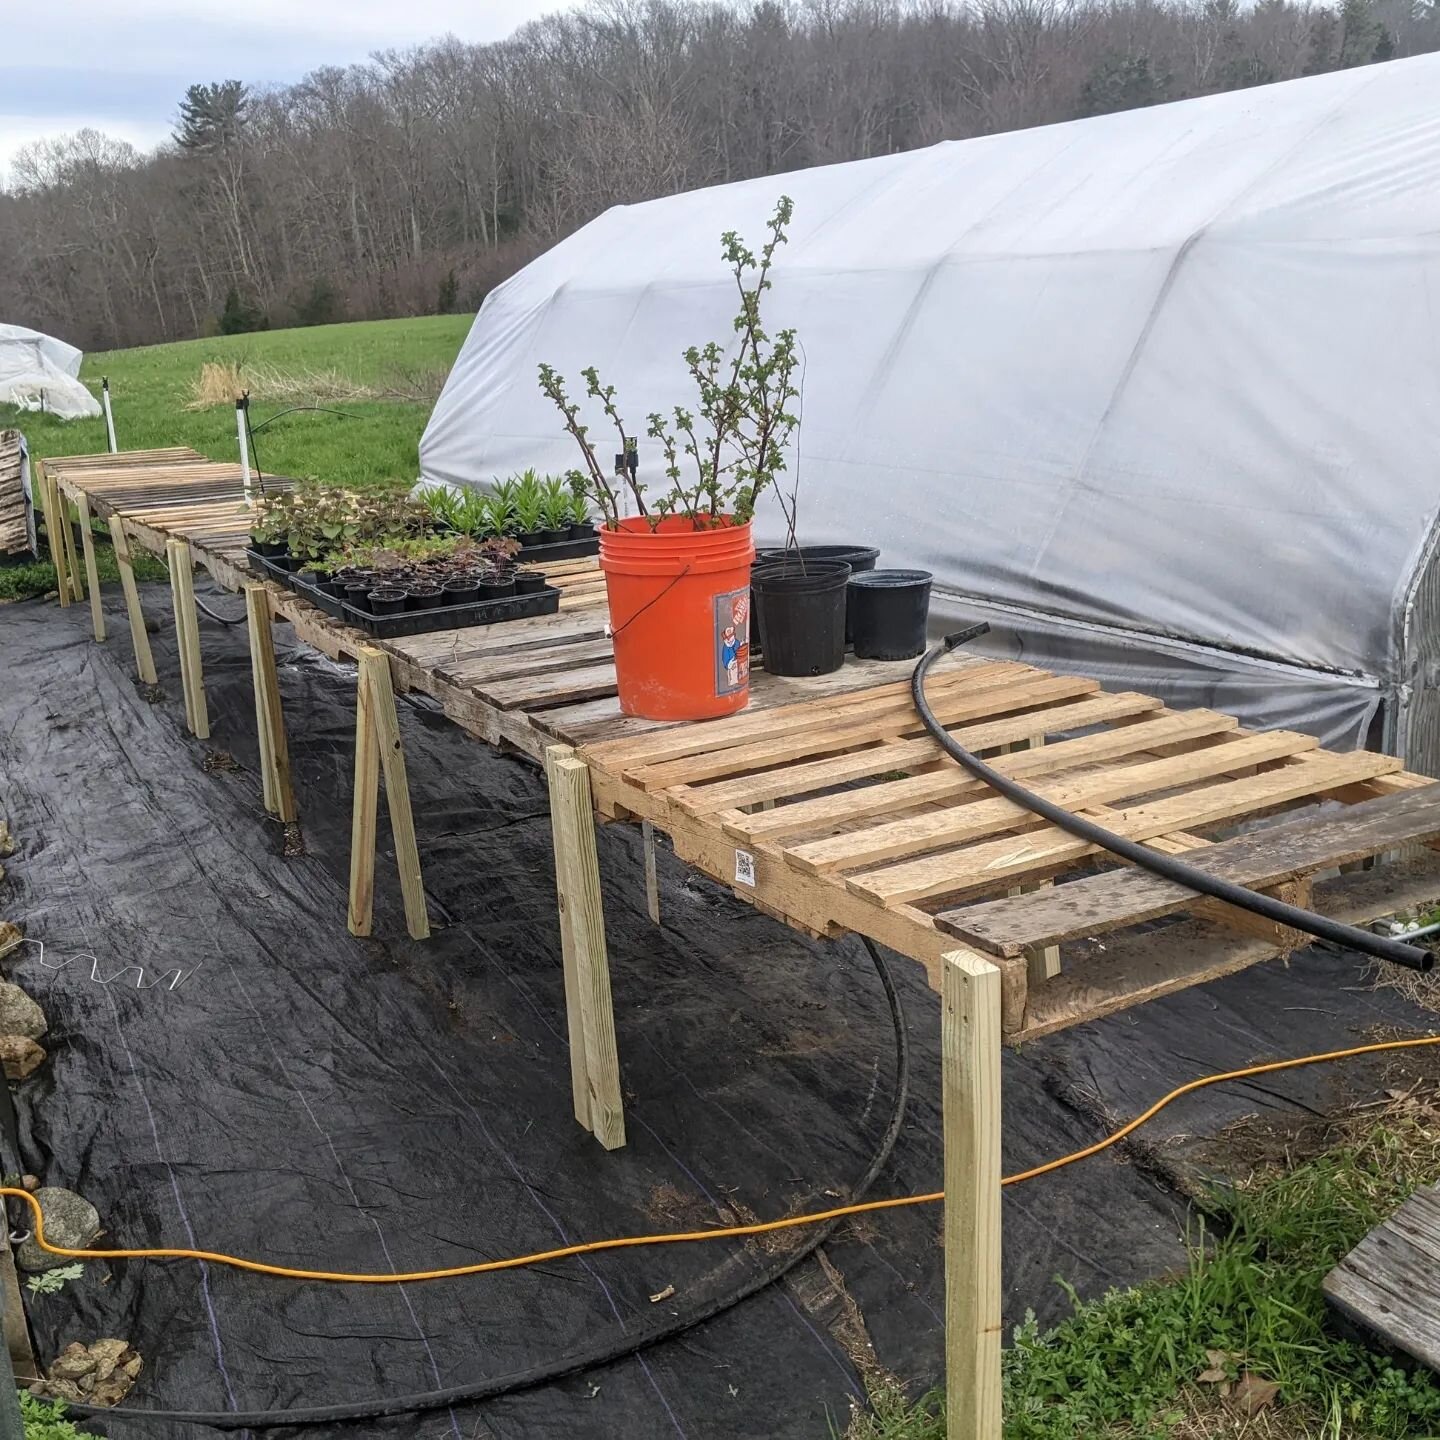 I just added some new plants to the online store. Take a look at the link in our bio. Many more to come, including those pictured later in this post!

New nursery pallet tables with automated irrigation! (1) The new robop (Quinn's word for robot) con